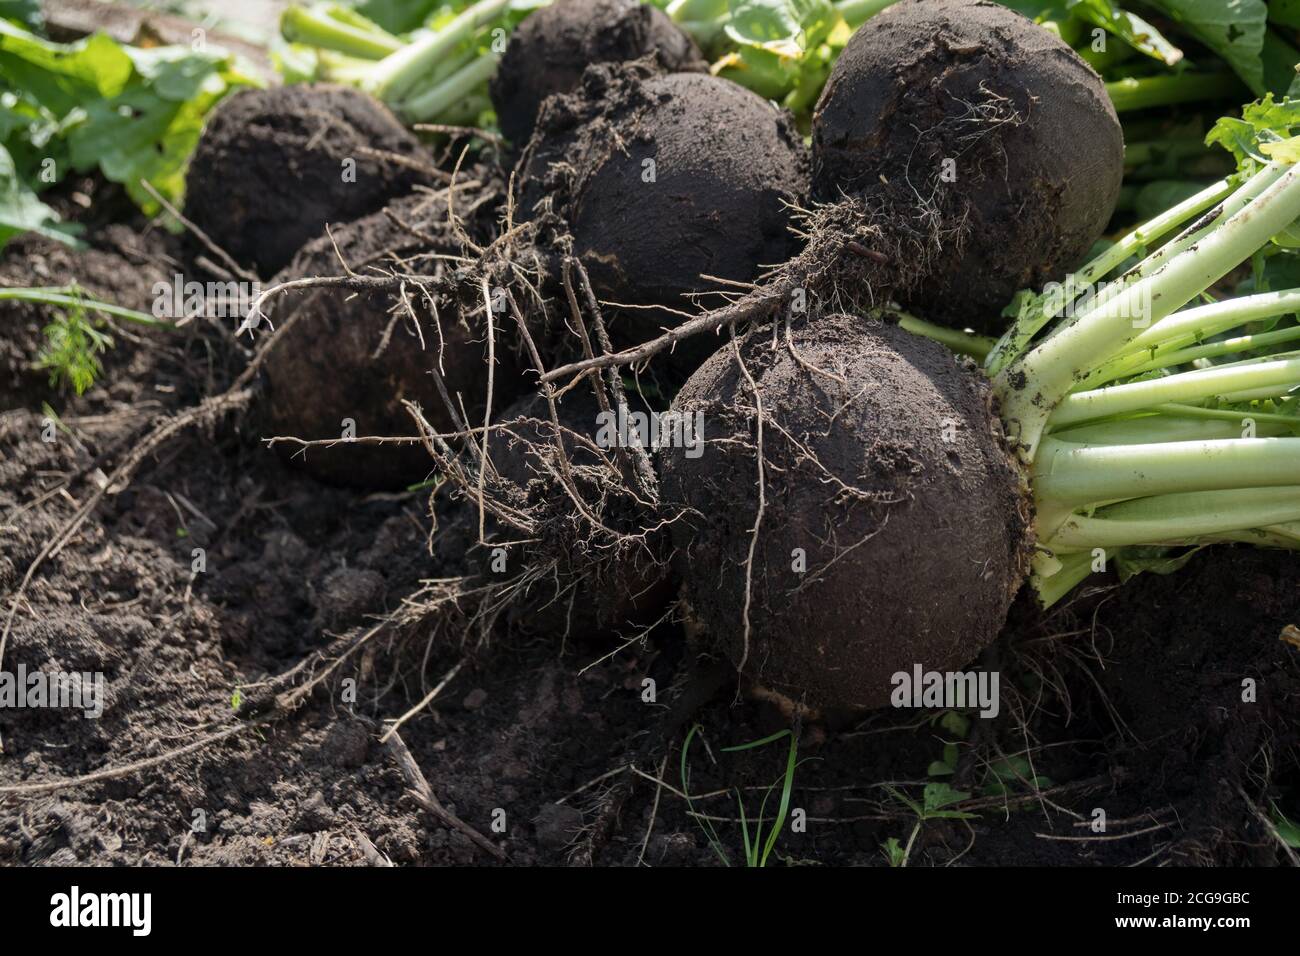 Black sowing radish (lat. Raphanus sativus) lies on a bed with tops. Stock Photo